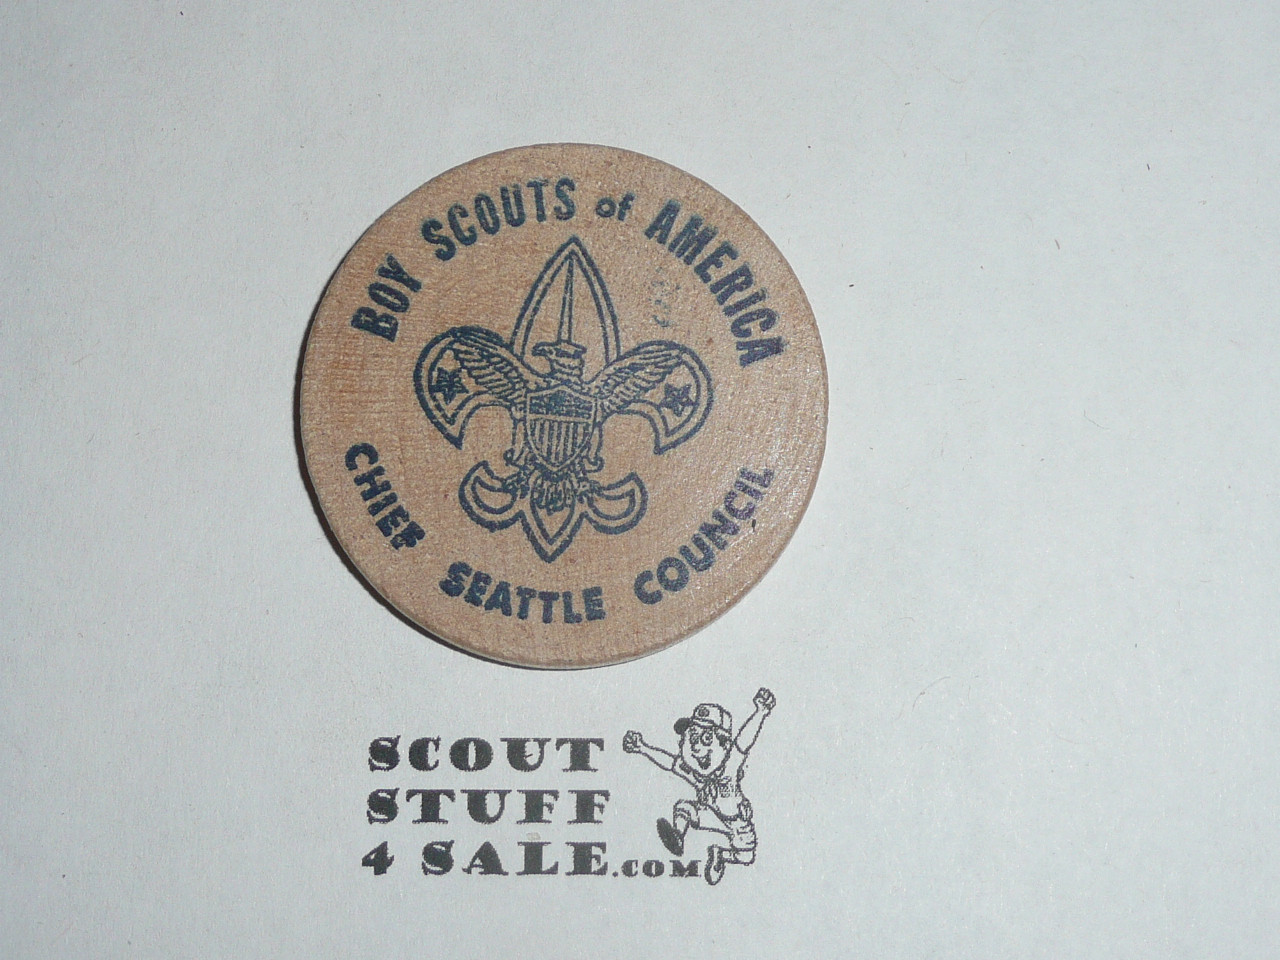 Chief Seattle Council 1972 Ice Cream Social Boy Scout Wooden Nickel